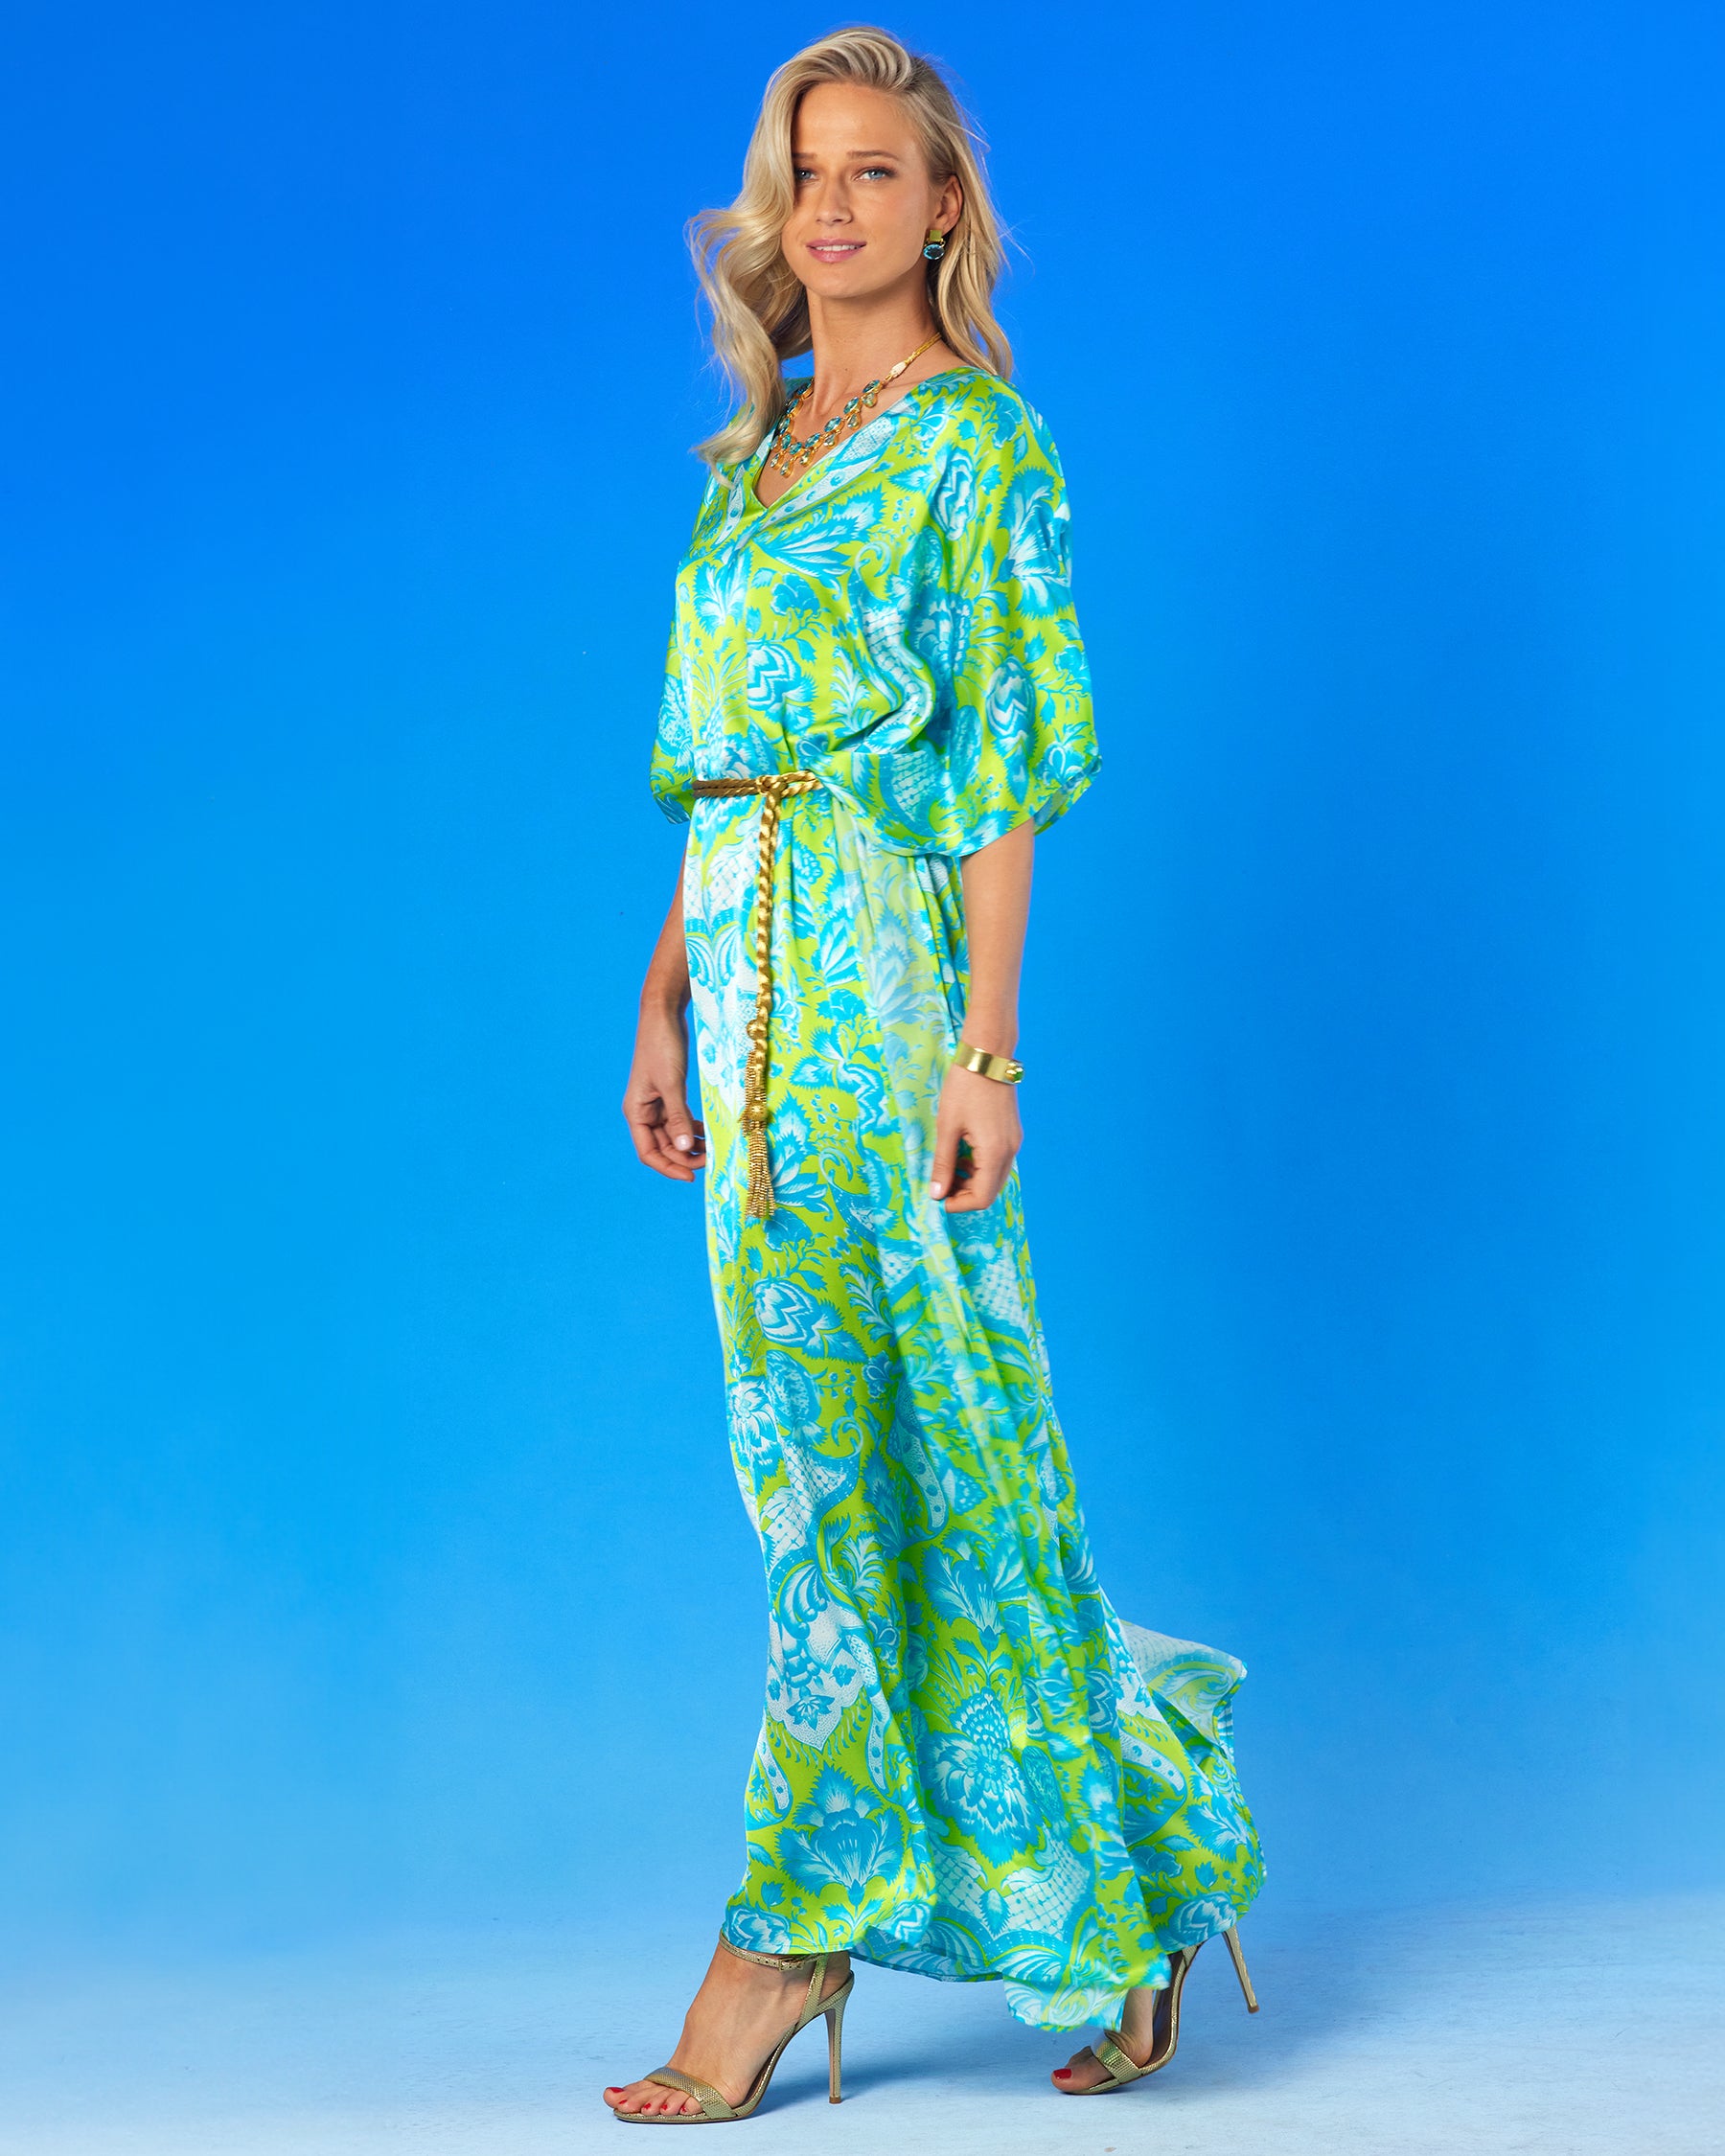 Artemis Rope Belt in Gold Beading cinching the Shalimar Silk Kaftan in Turquoise and Lime